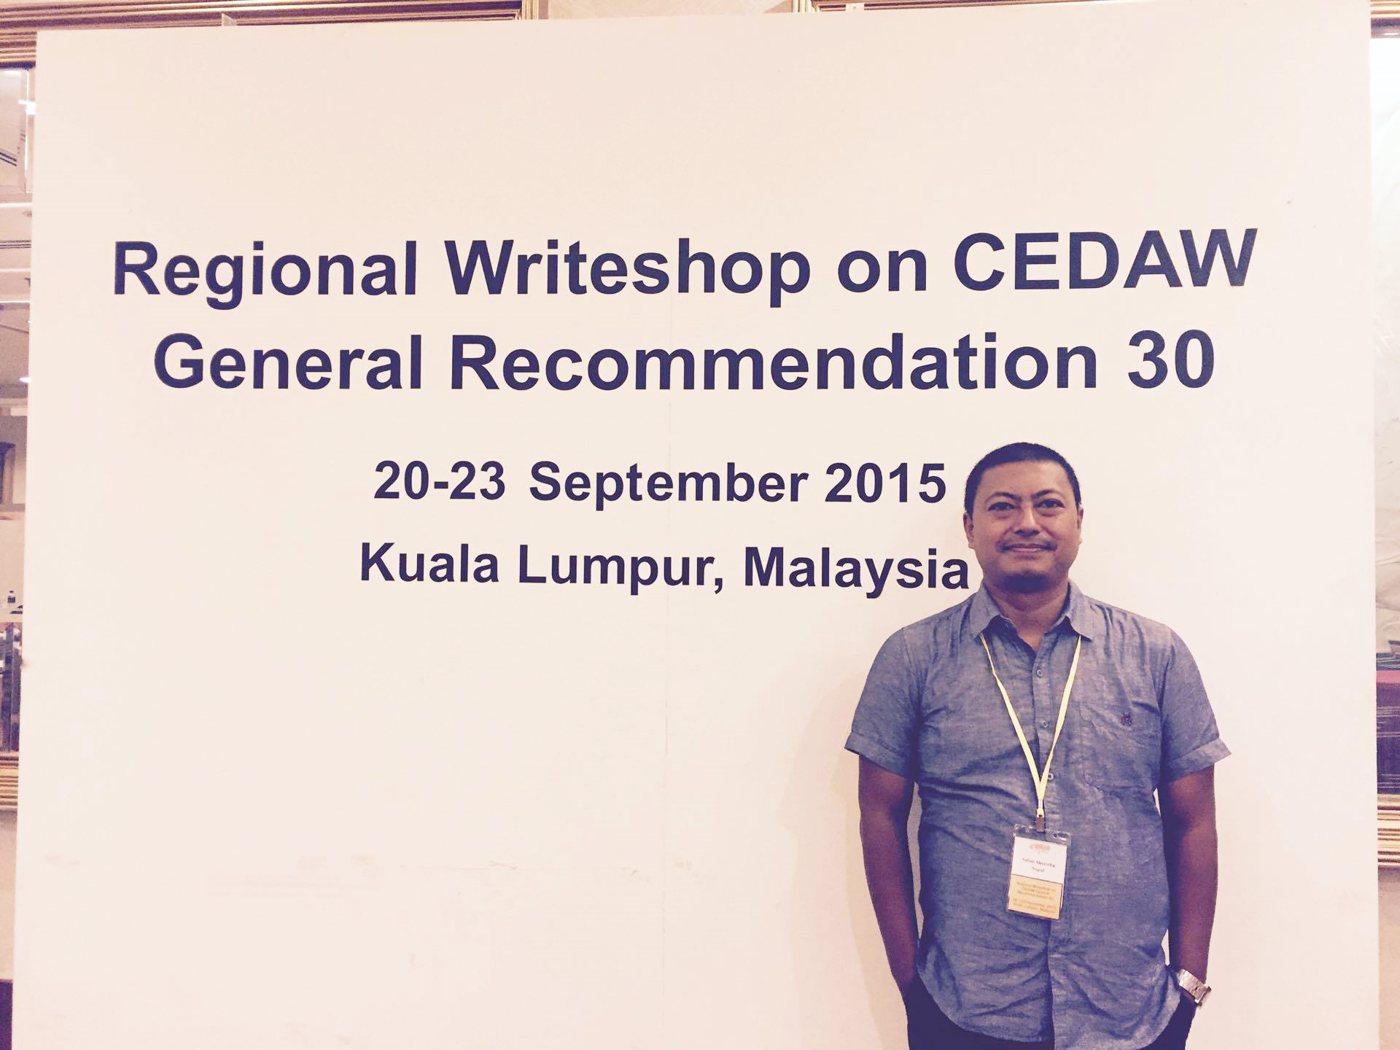 Advocate Sabin Shrestha participating in the Regional Writeshop on CEDAW in September 2015